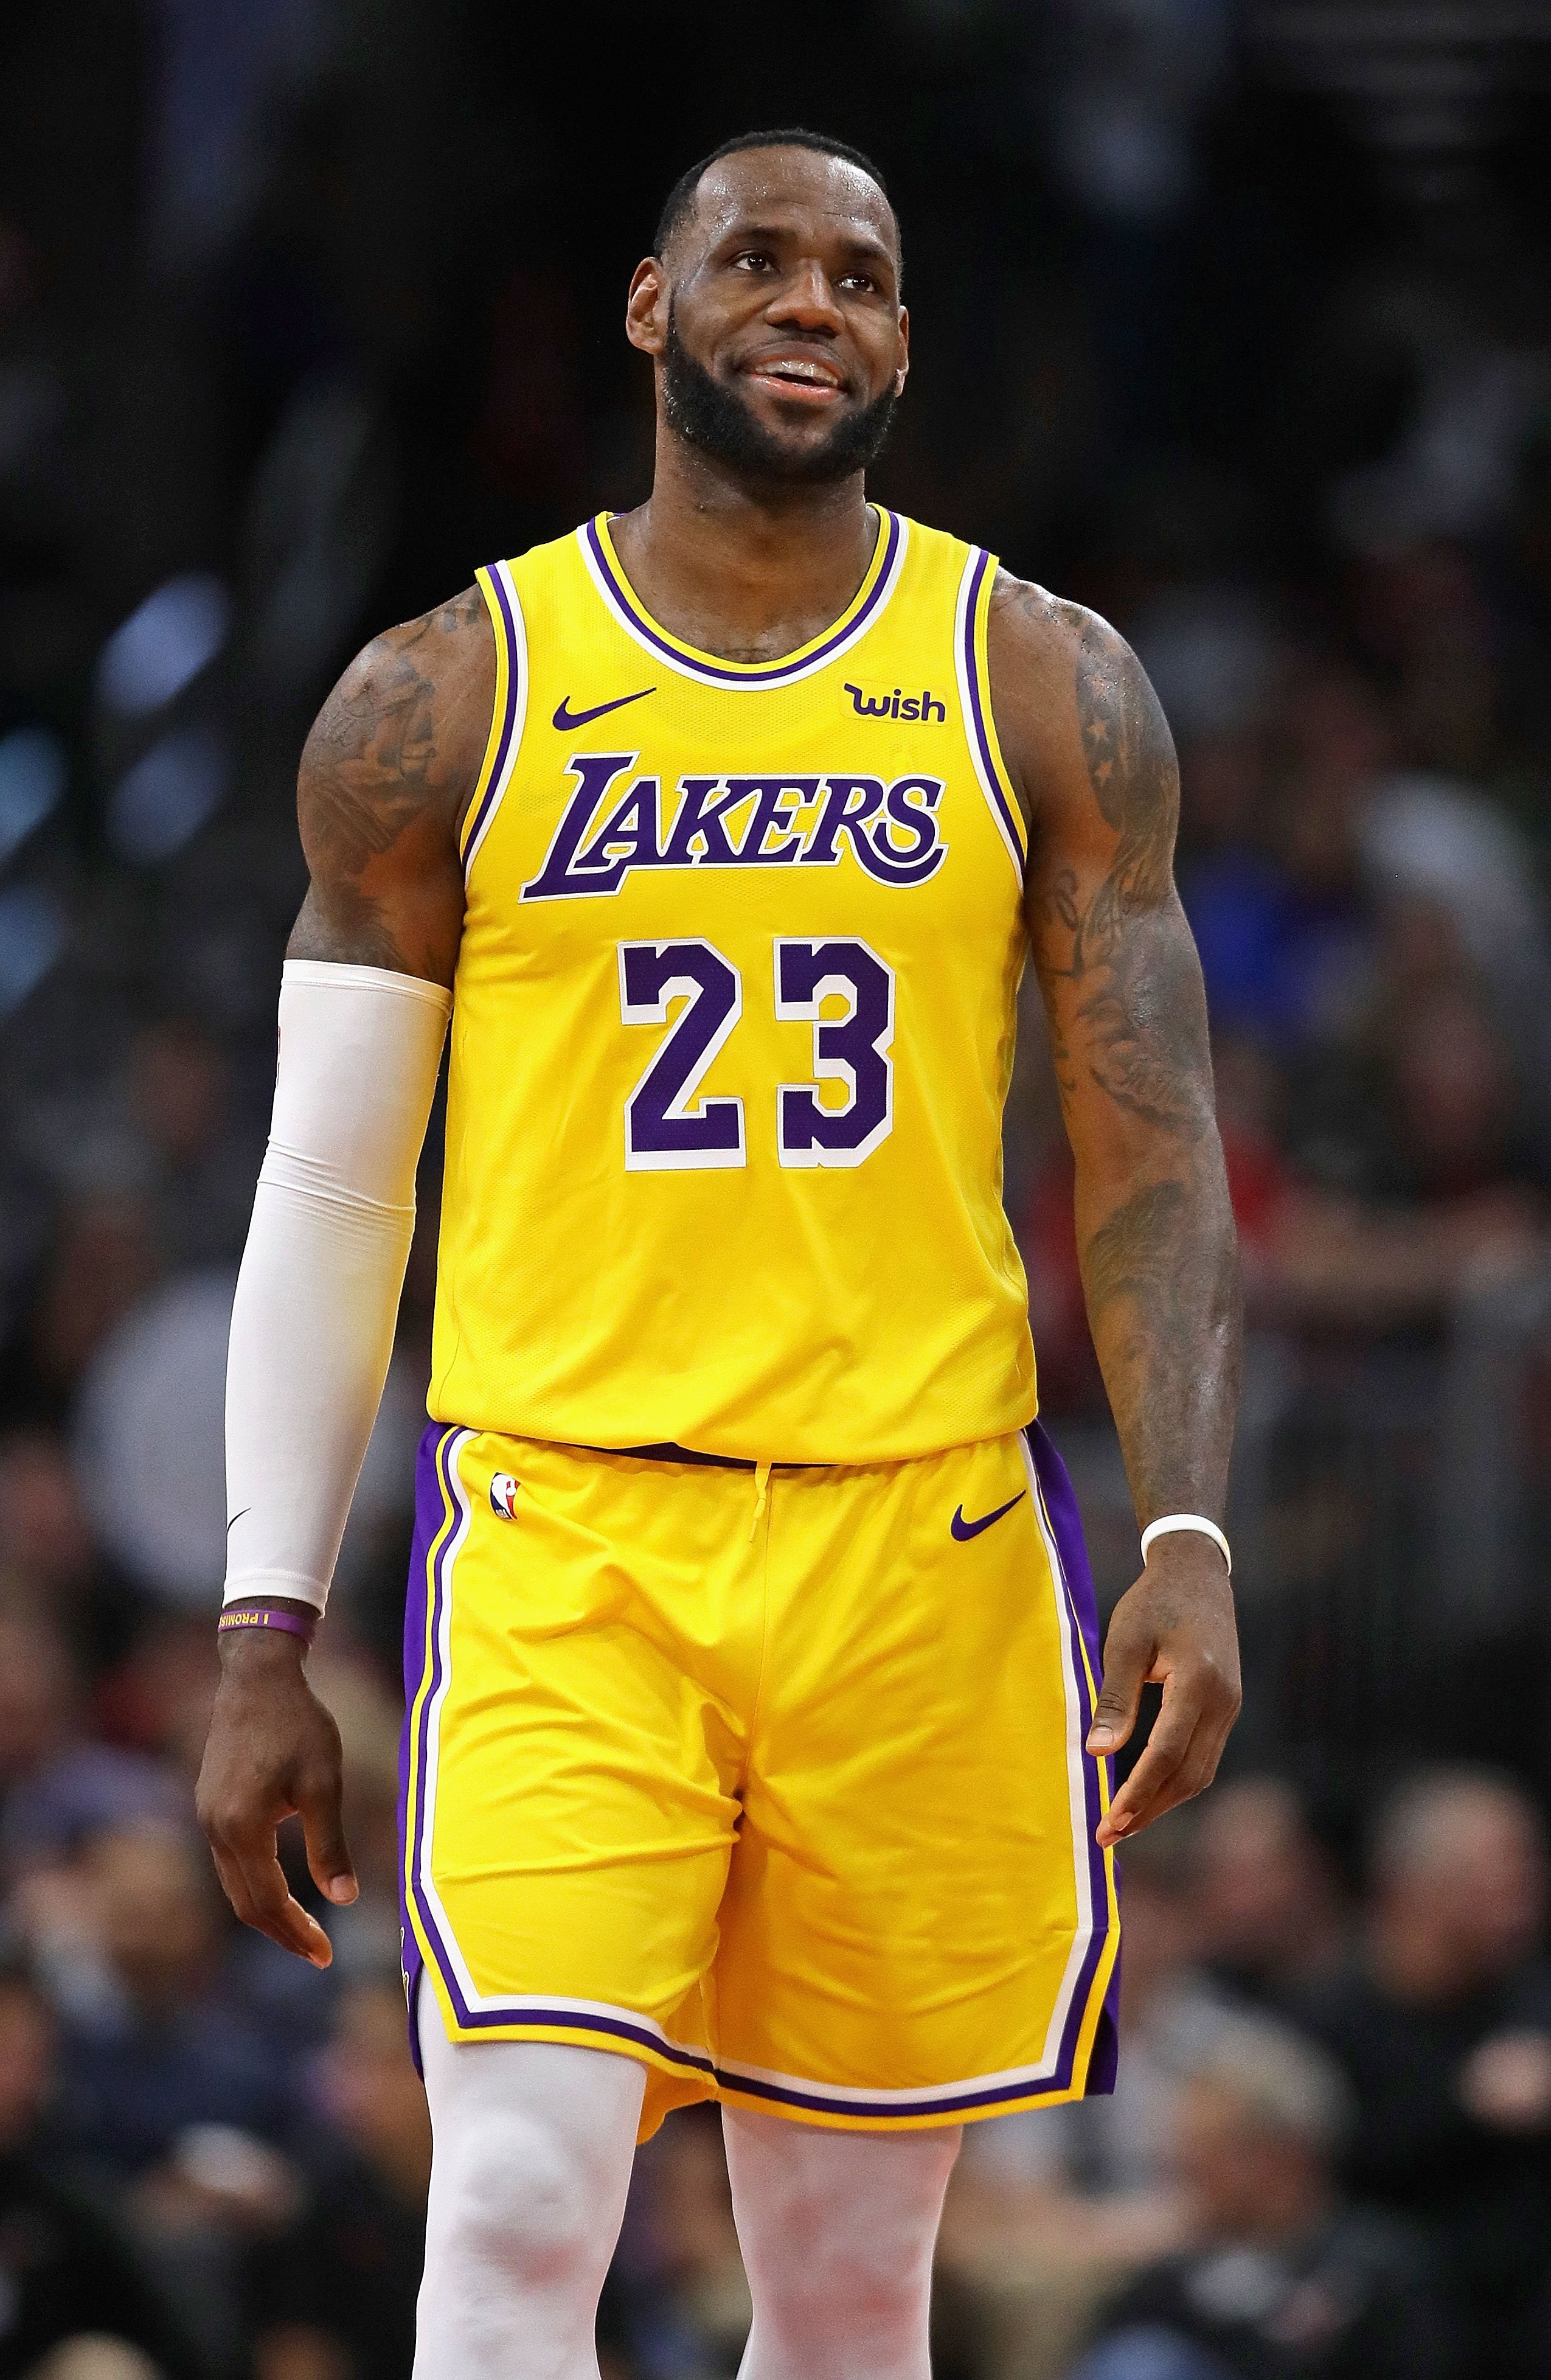 LeBron James #23 of the Los Angeles Lakers smiles after a play against the Chicago Bulls on March 12, 2019. | Photo: Getty Images